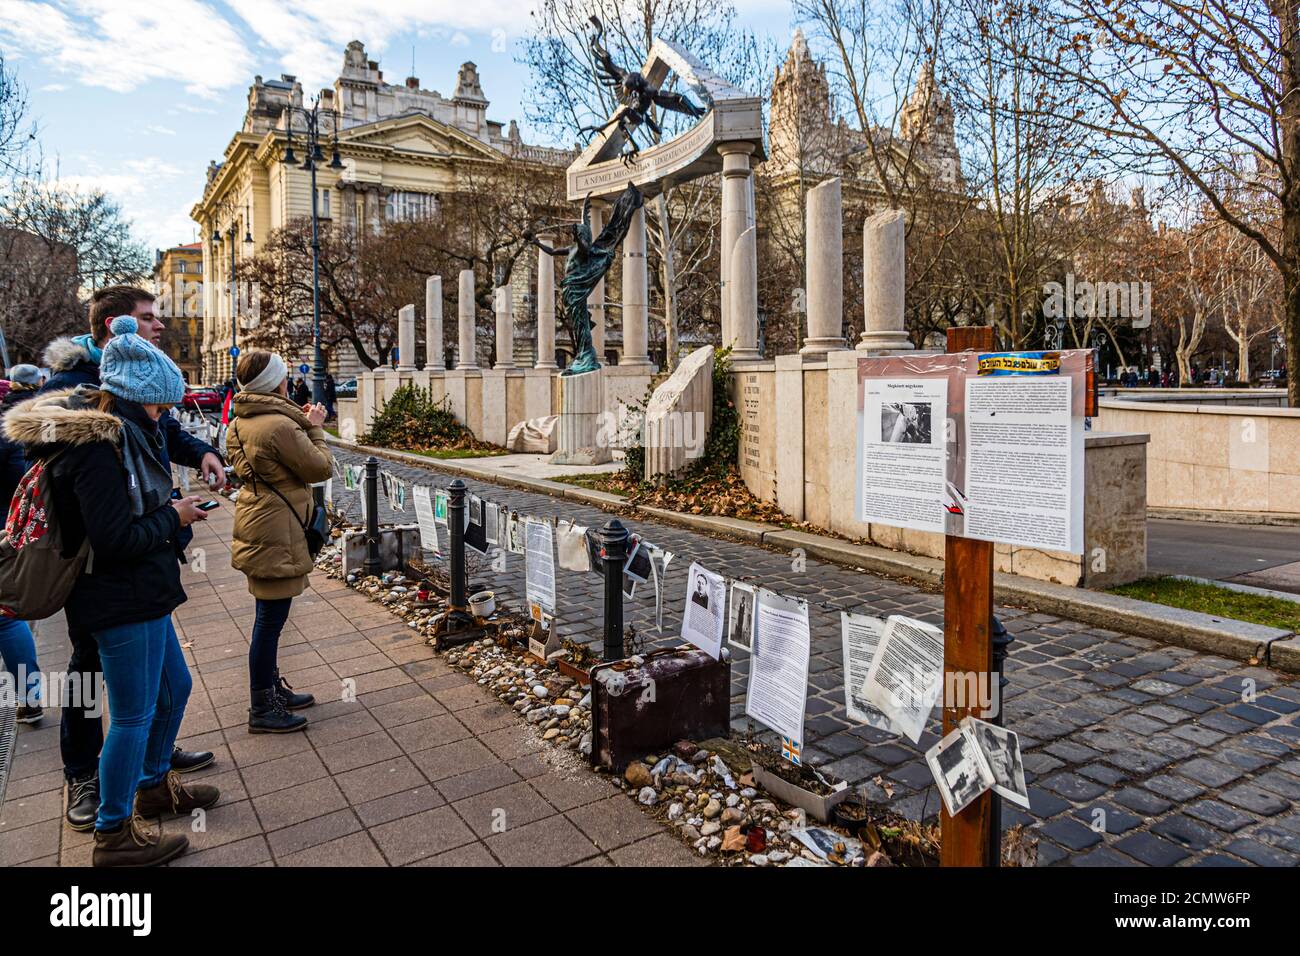 Spontaneous exhibition about the role of the Hungarian people towards their Jewish fellow citizens during the Nazi period. In the background is the Monument to the victims of the German occupation in Budapest, Hungary Stock Photo